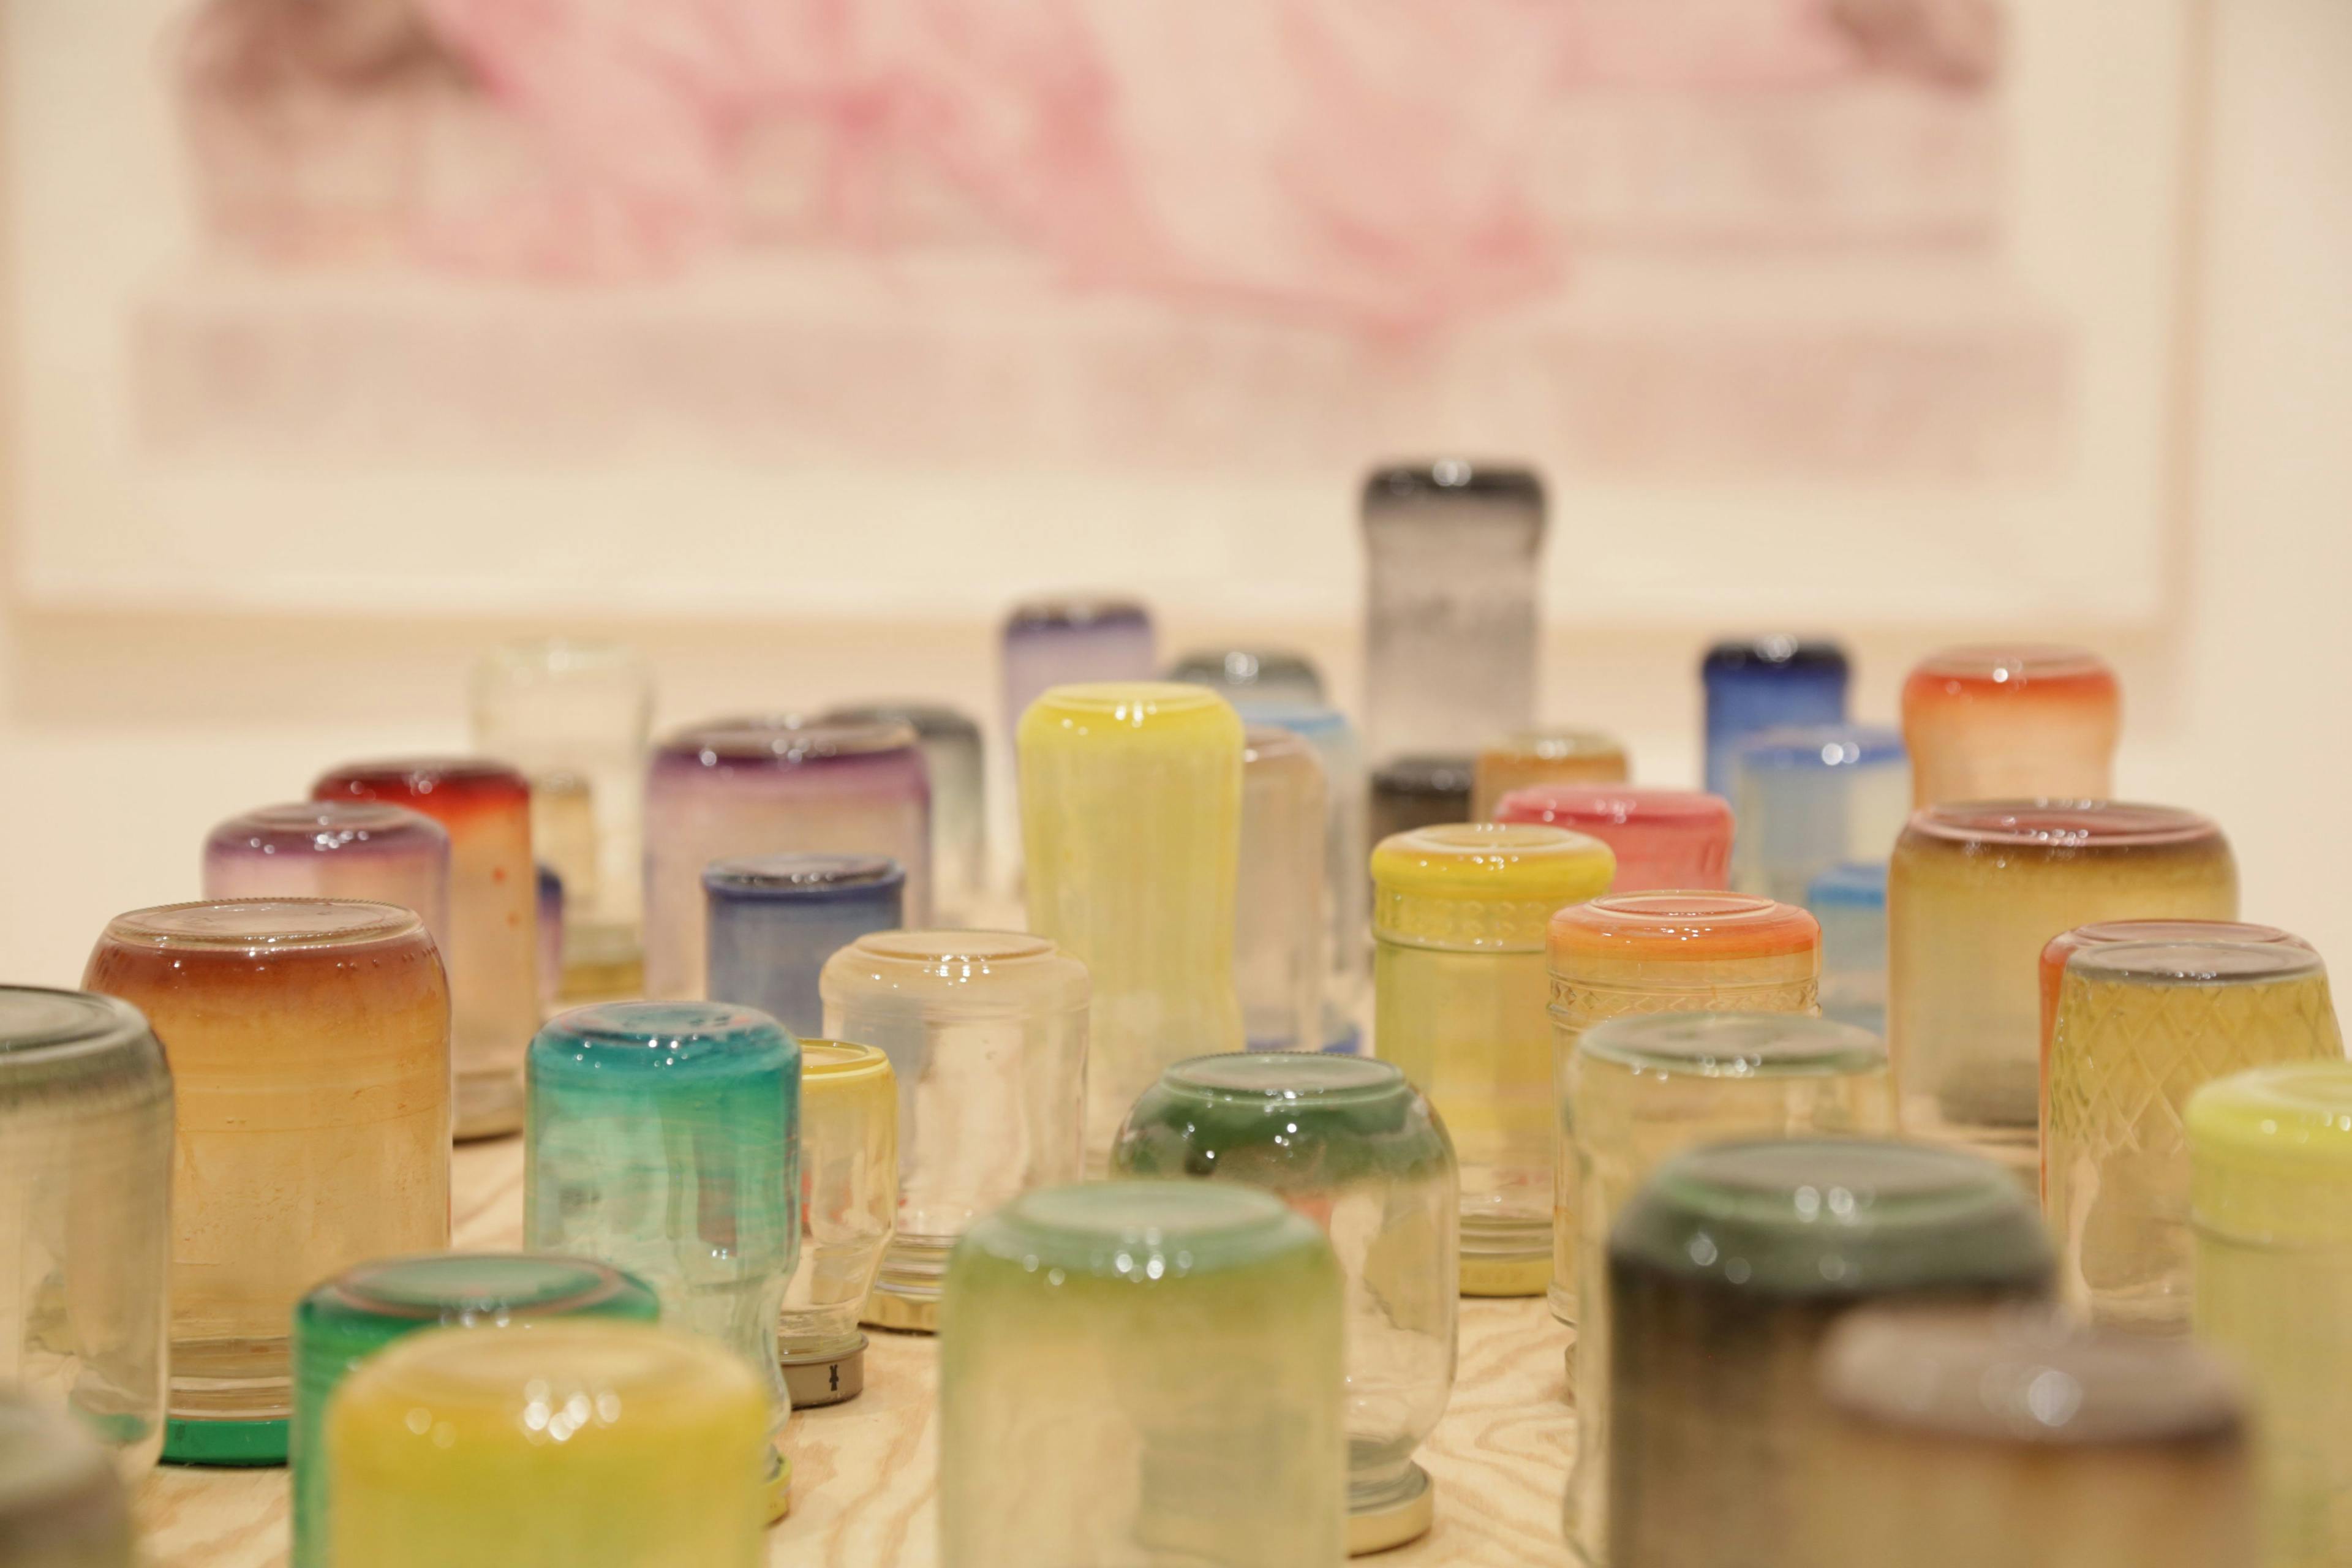 Artwork in image: Solveig Adalsteinsdotter, Evaporated Watercolours in Glass, 2000